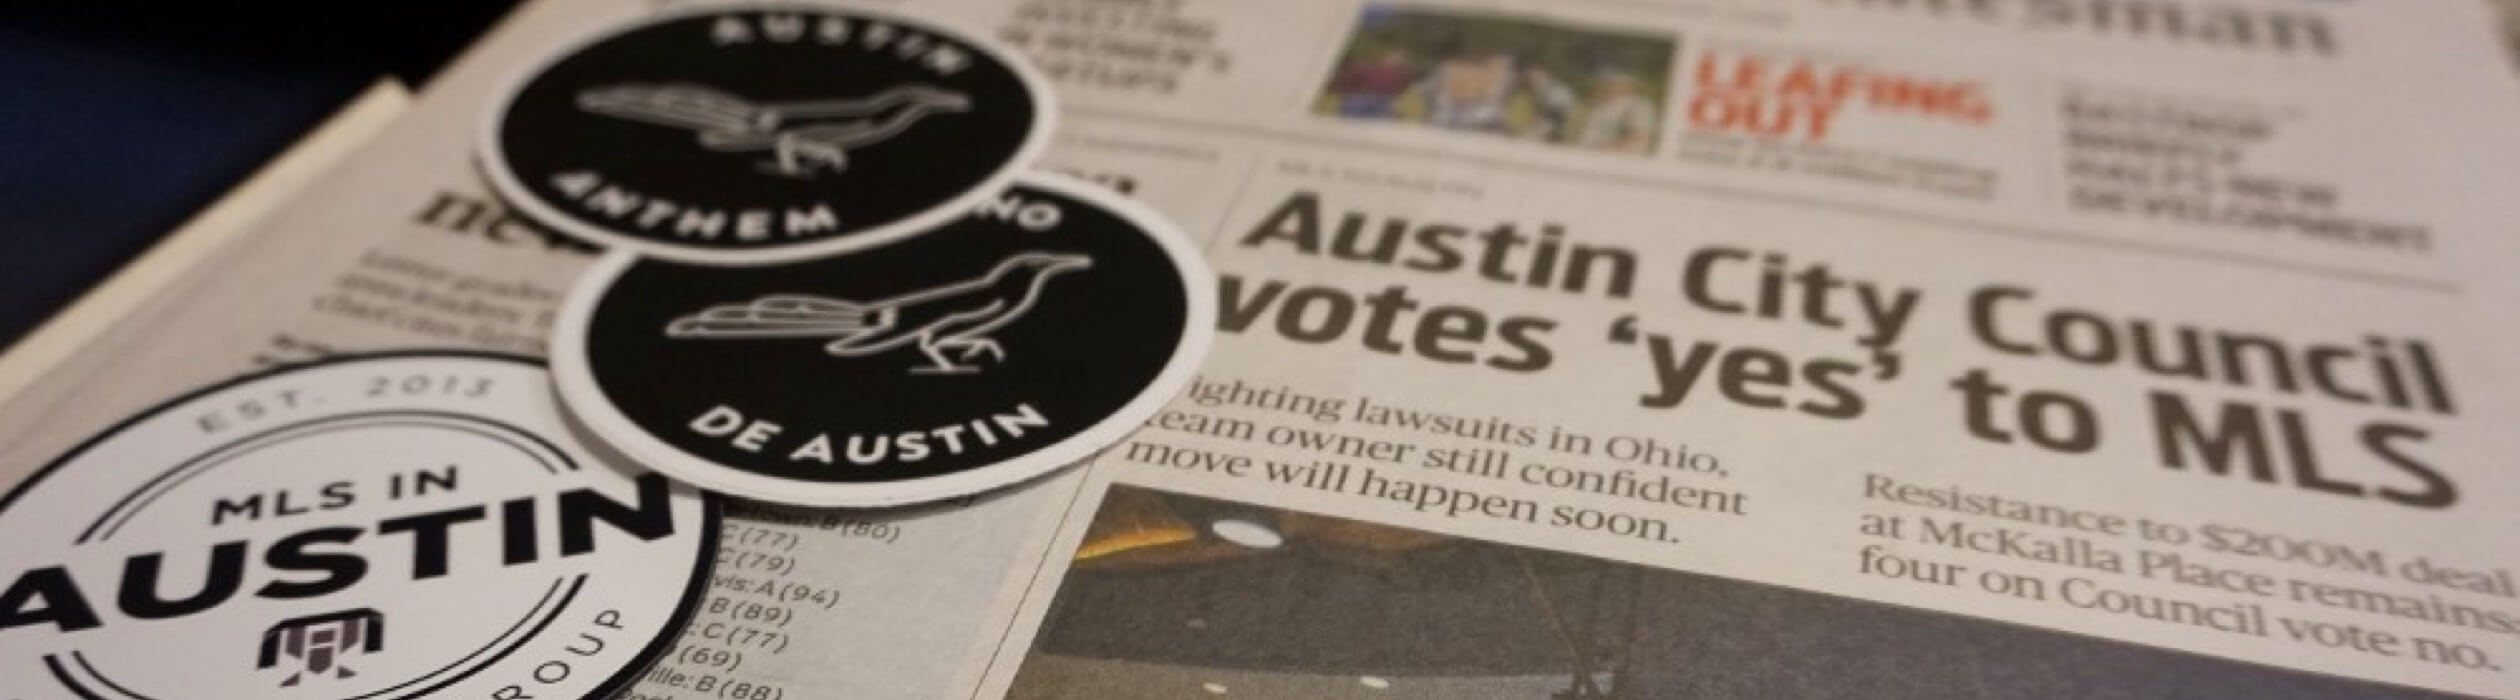 The paper from the City Council approving Austin FC.